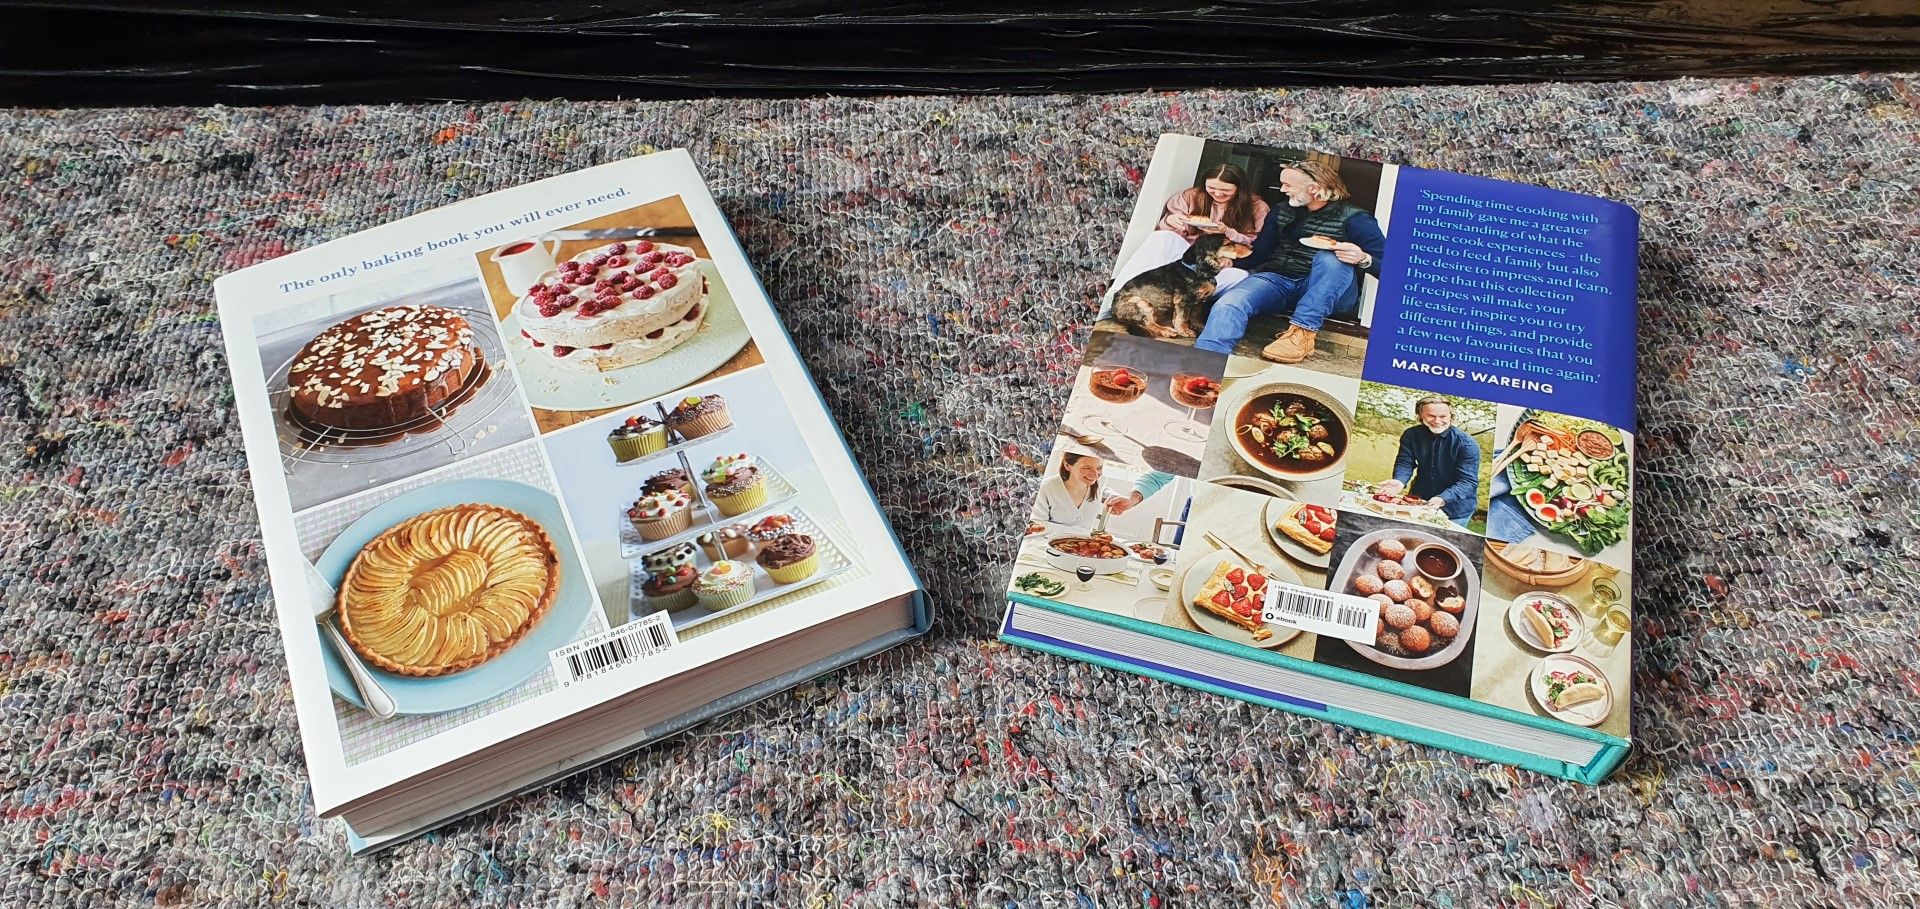 2 x Cookbooks by Mary Berry and Marcus Wareing - New Stock - Ref: TCH292 - CL840 - Location: - Image 2 of 2